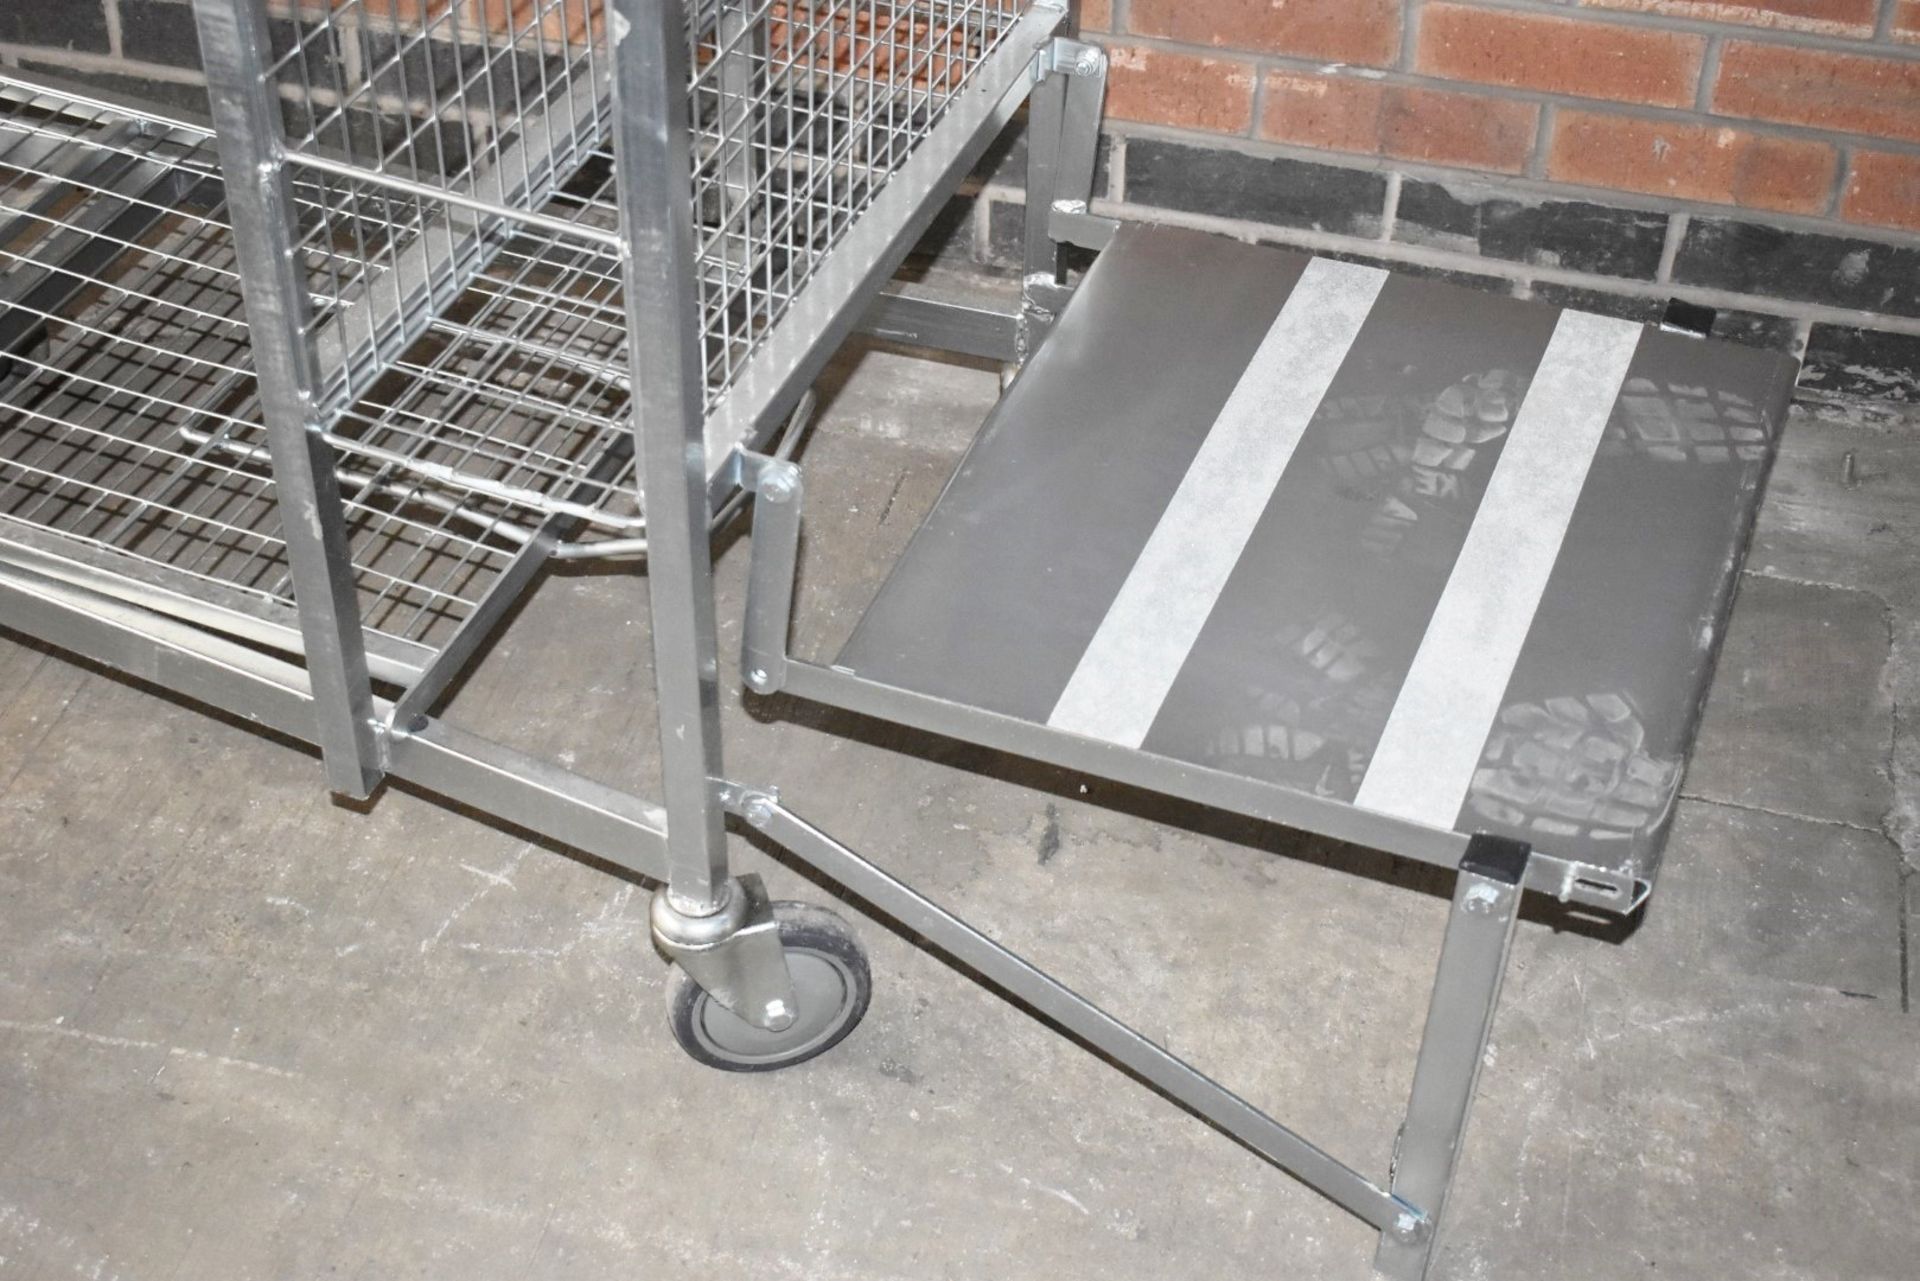 1 x Supermarket Retail Merchandising Trolley With Pull Out Step and Folding Shelf - Dimensions: - Image 7 of 12